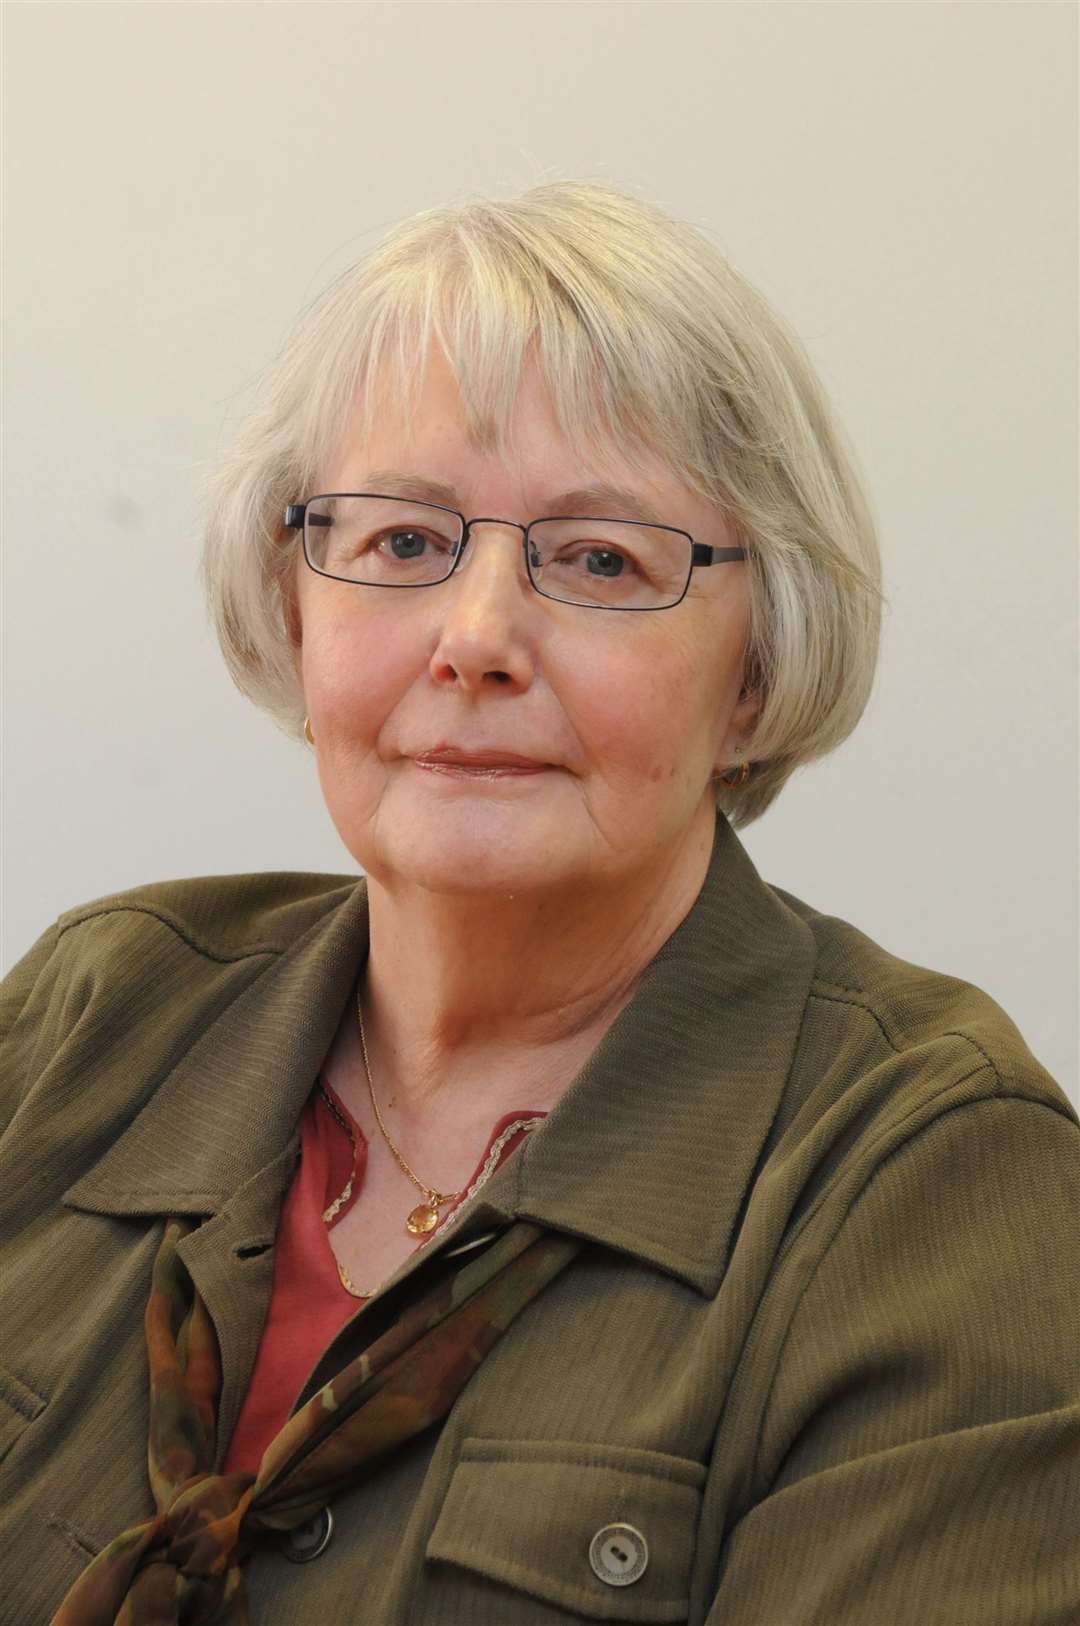 Pauline Taylor was the editor of The Northern Scot who launched the campaign for an Elgin bypass in 2002.